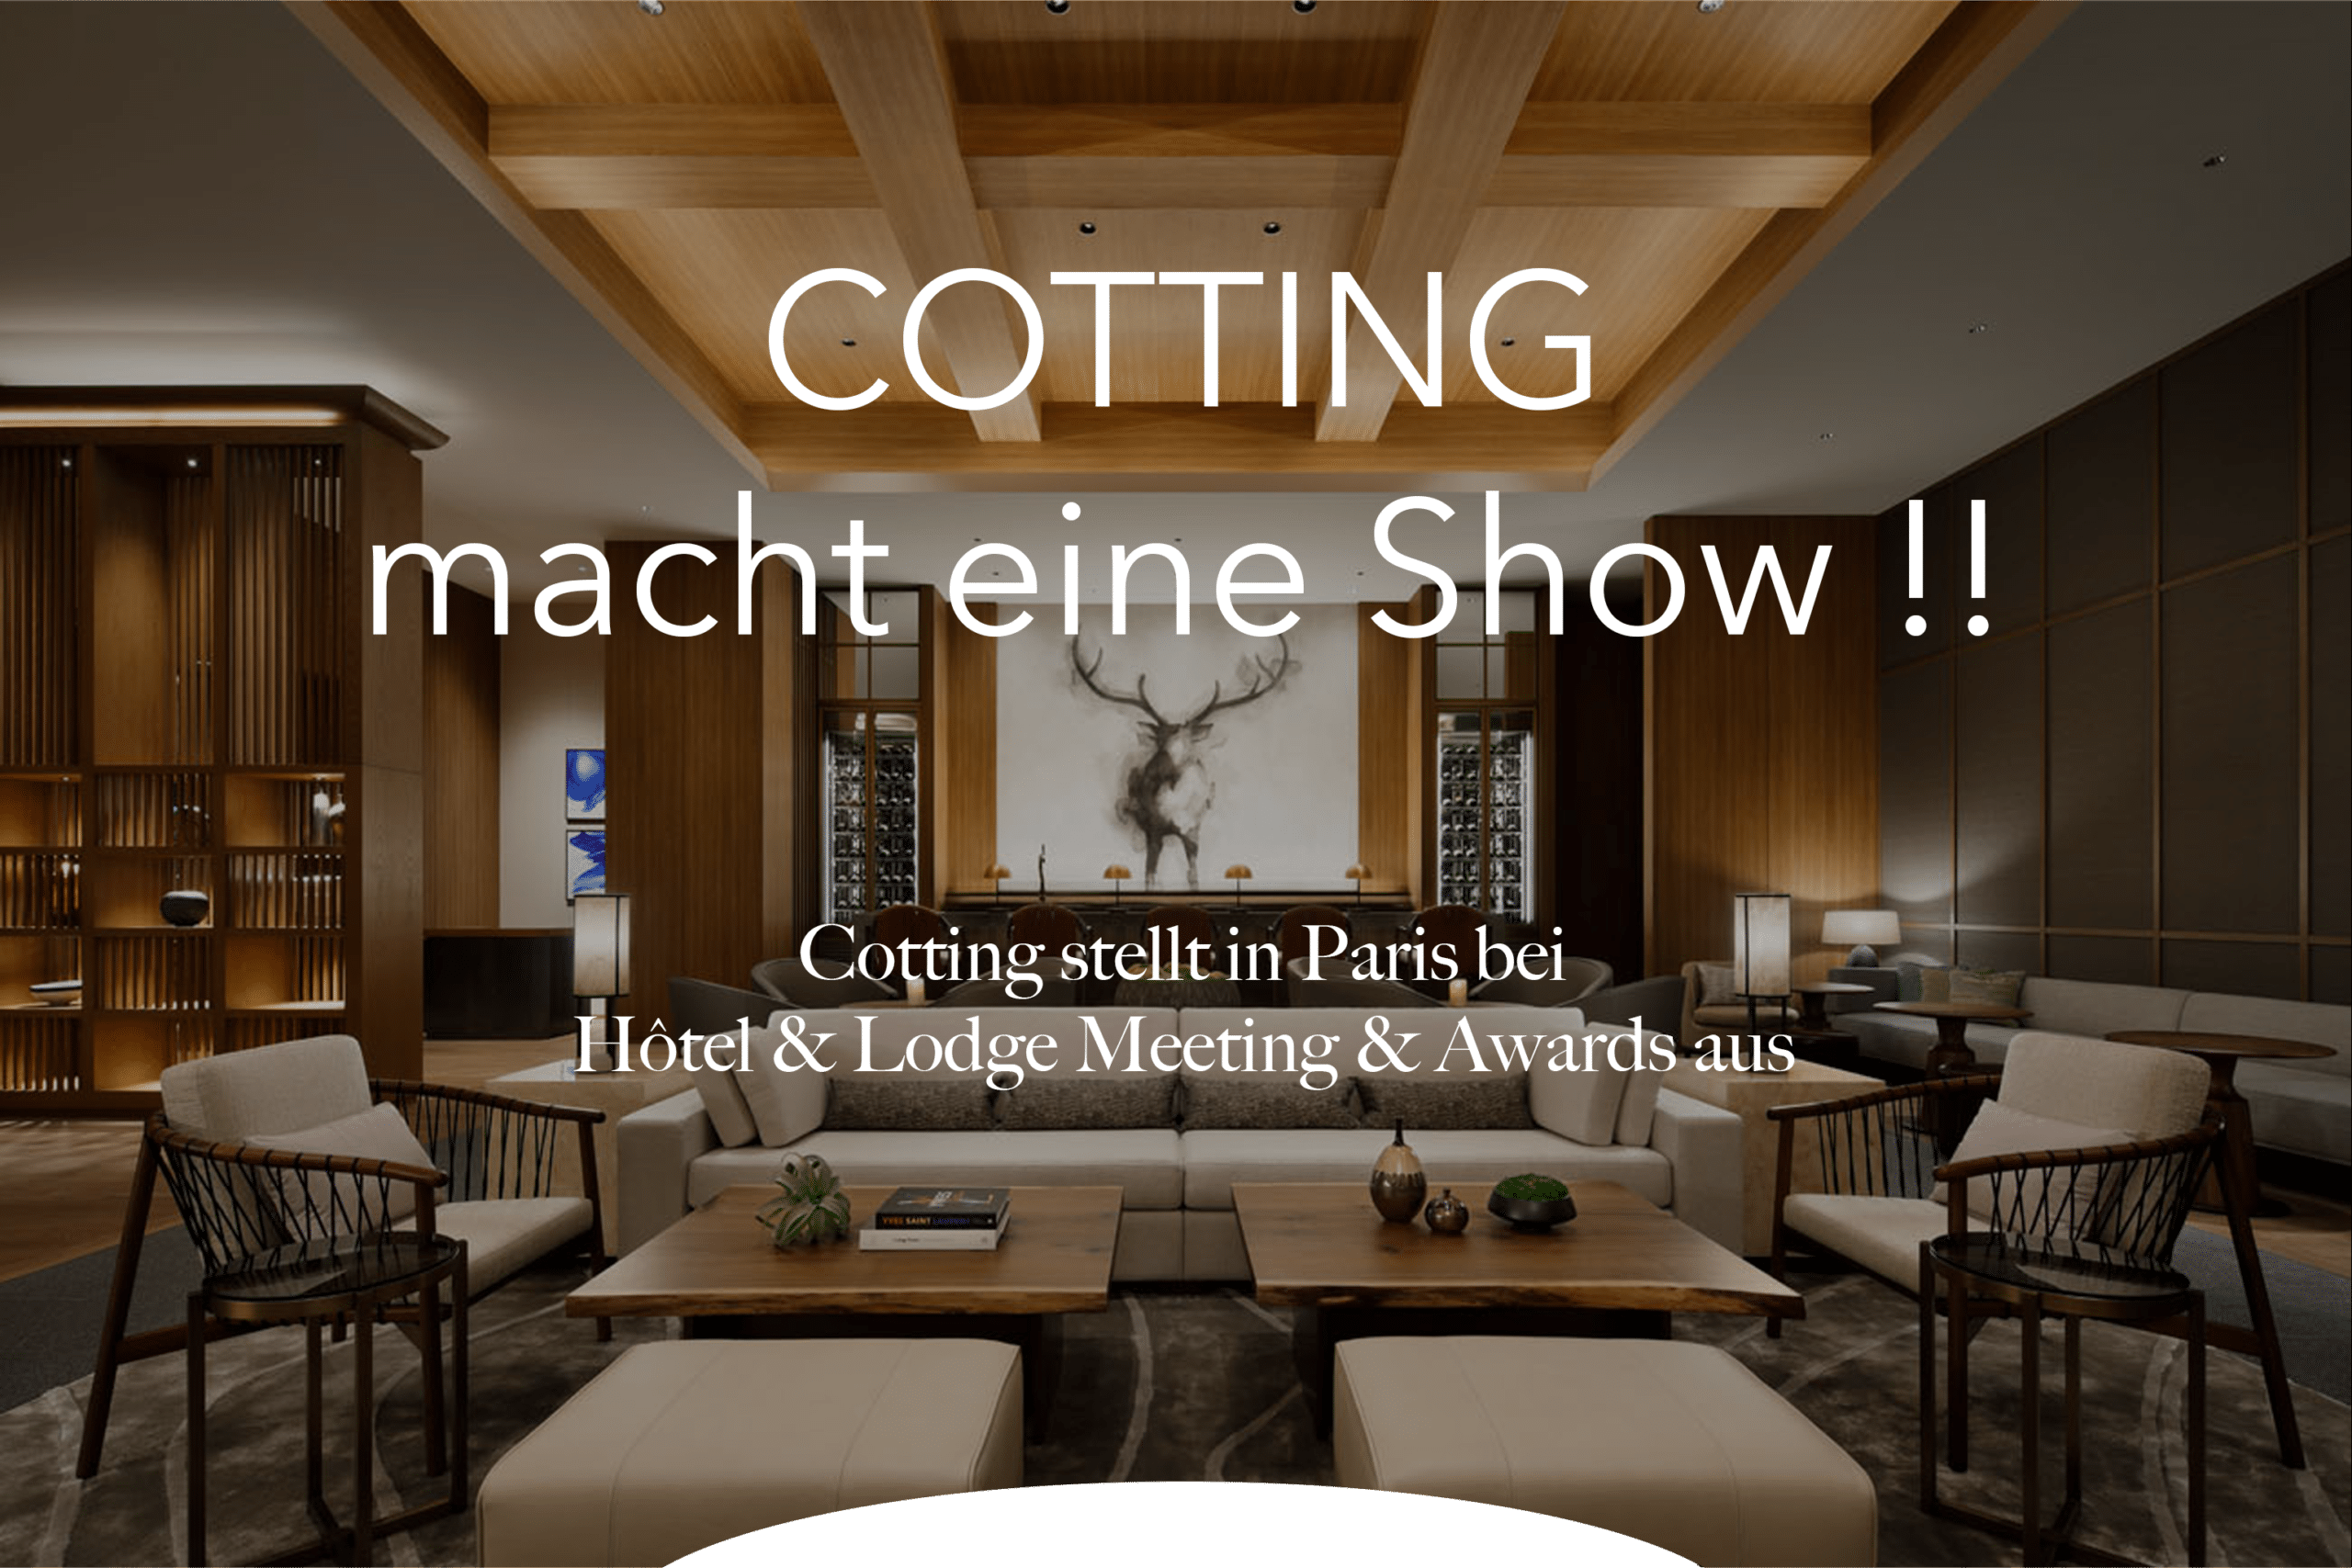 You are currently viewing COTTING macht eine Show !!